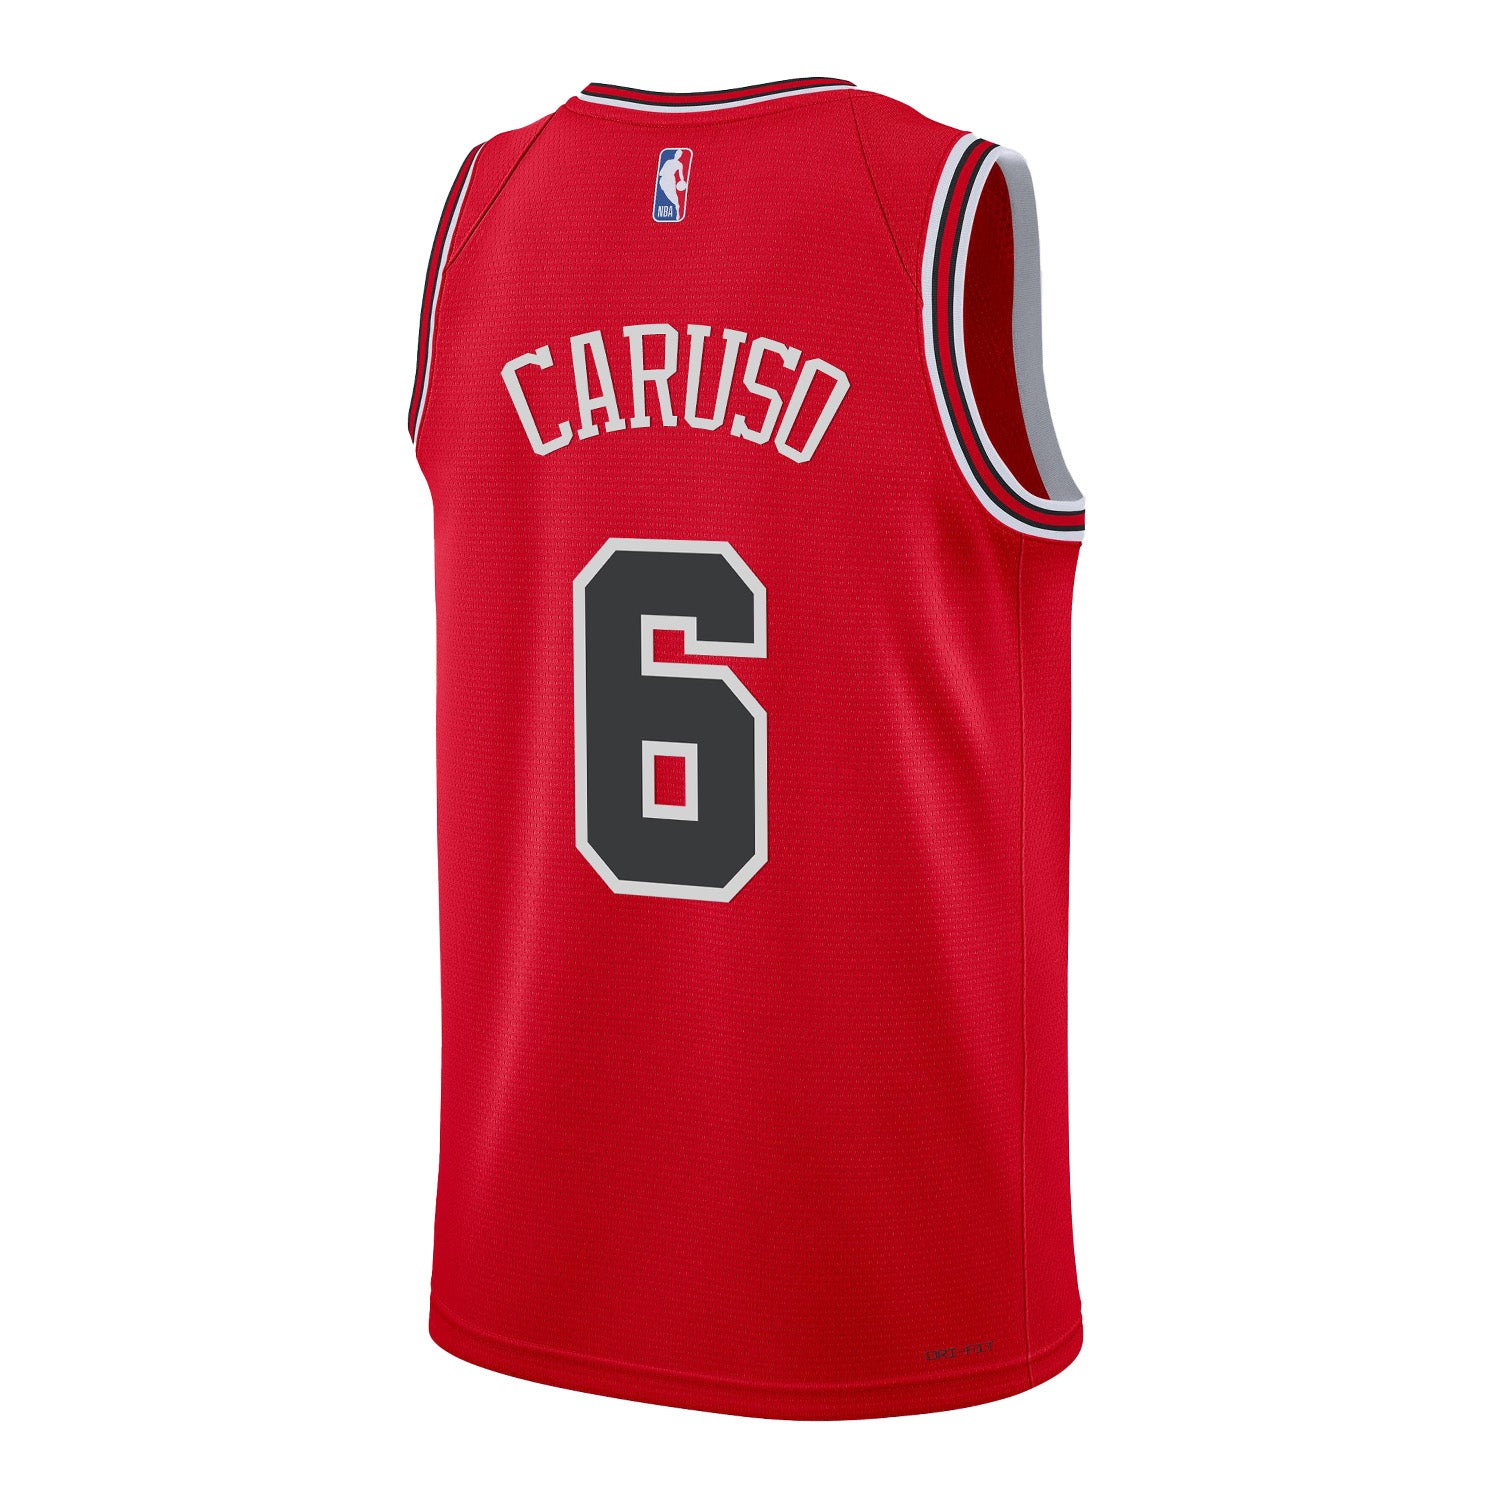 caruso jersey number